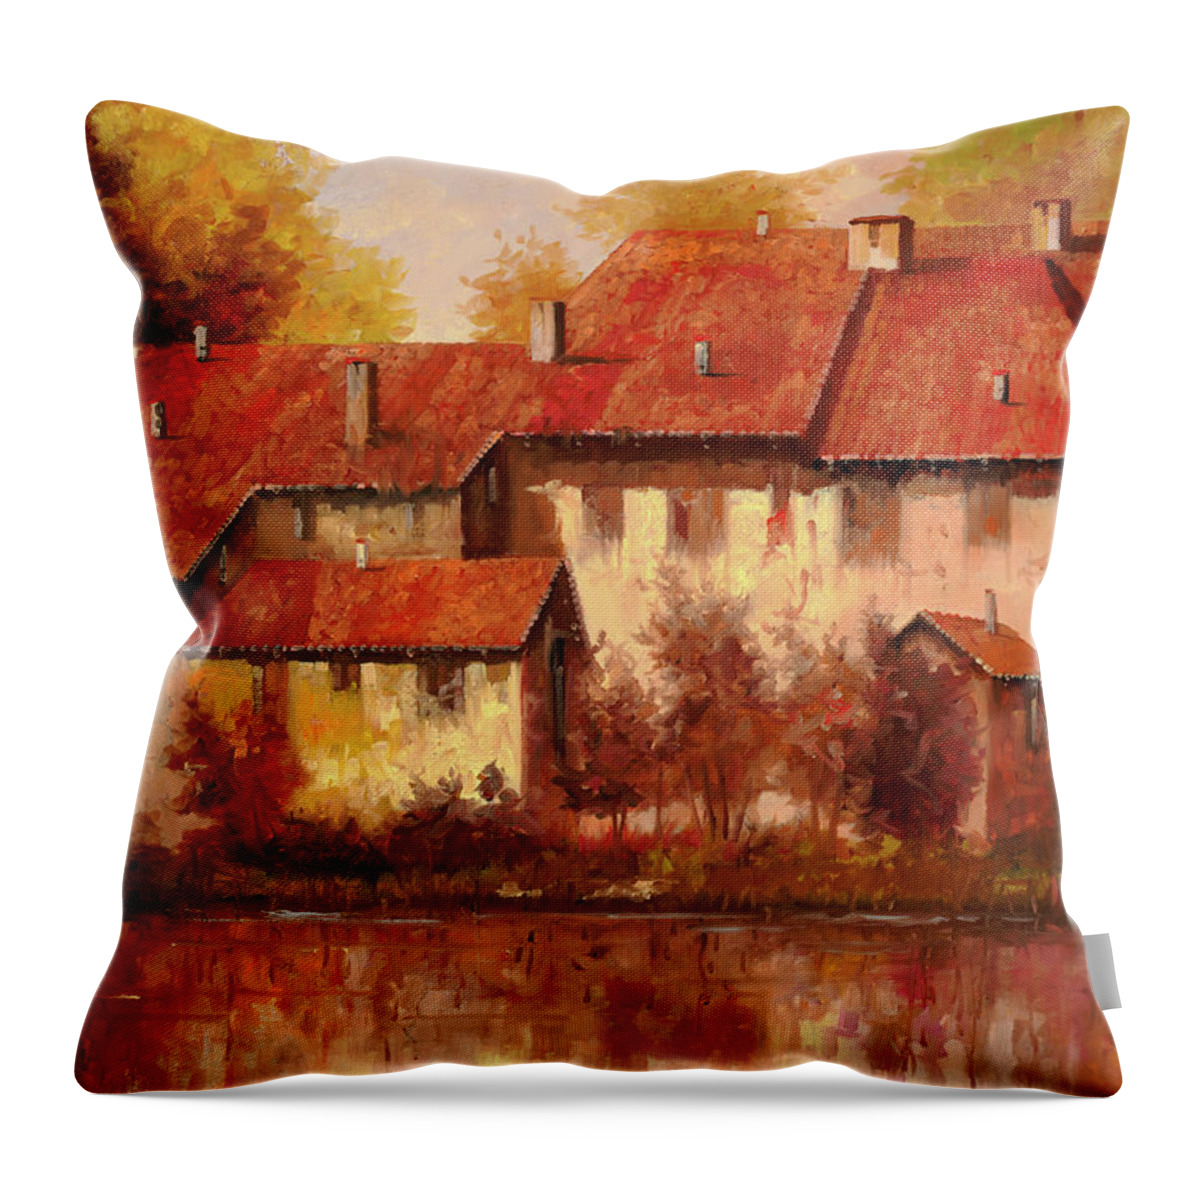 Landscape Throw Pillow featuring the painting Il Borgo Rosso by Guido Borelli